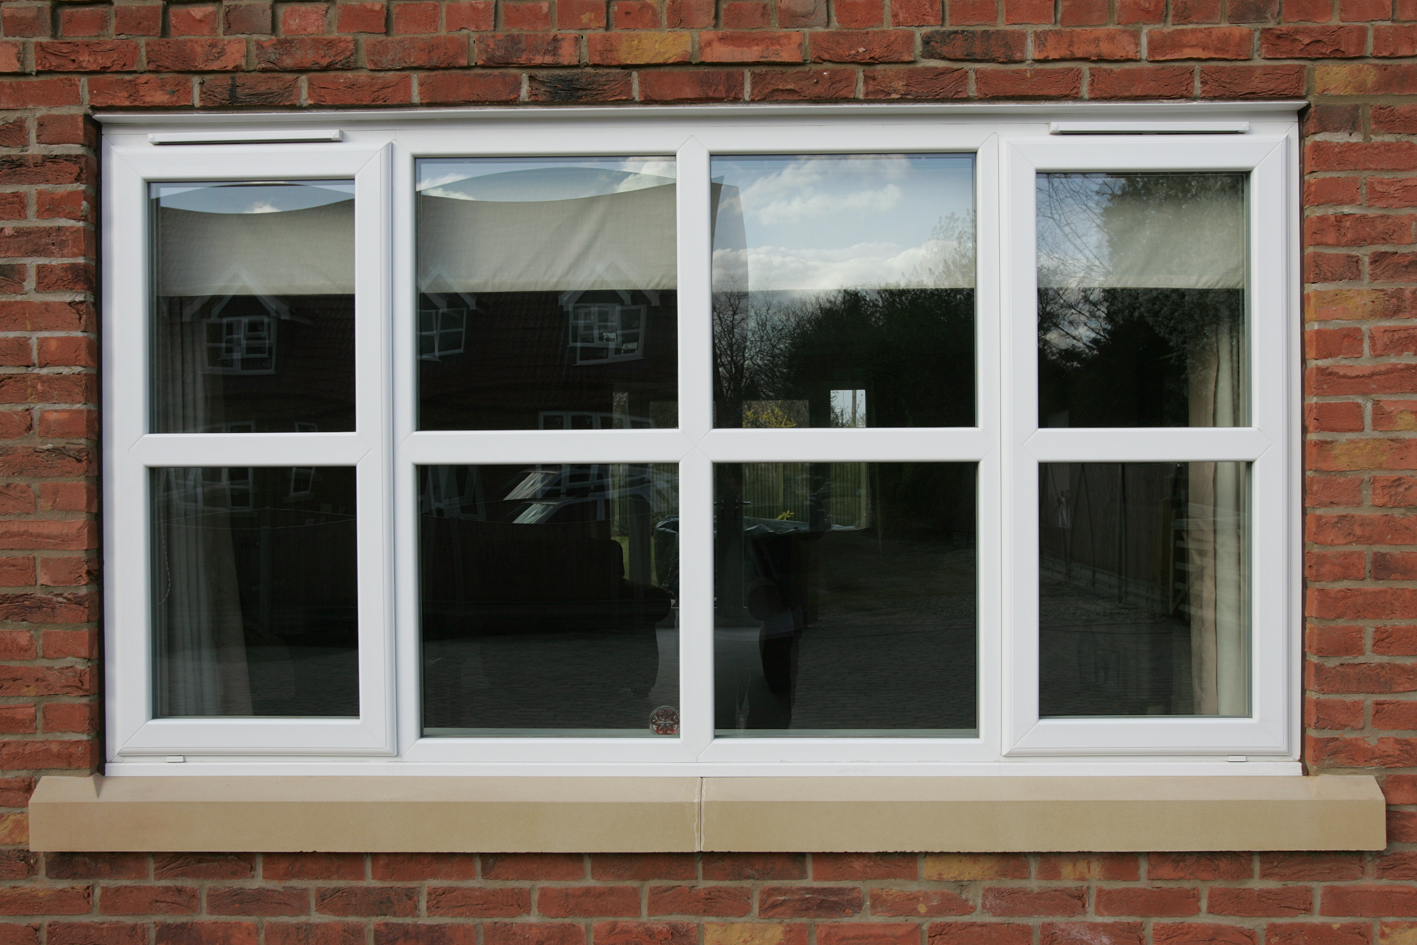 EYG’s new ‘EcoHeritage’ windows range exceeds industry performance standards and offers sleek and contemporary style